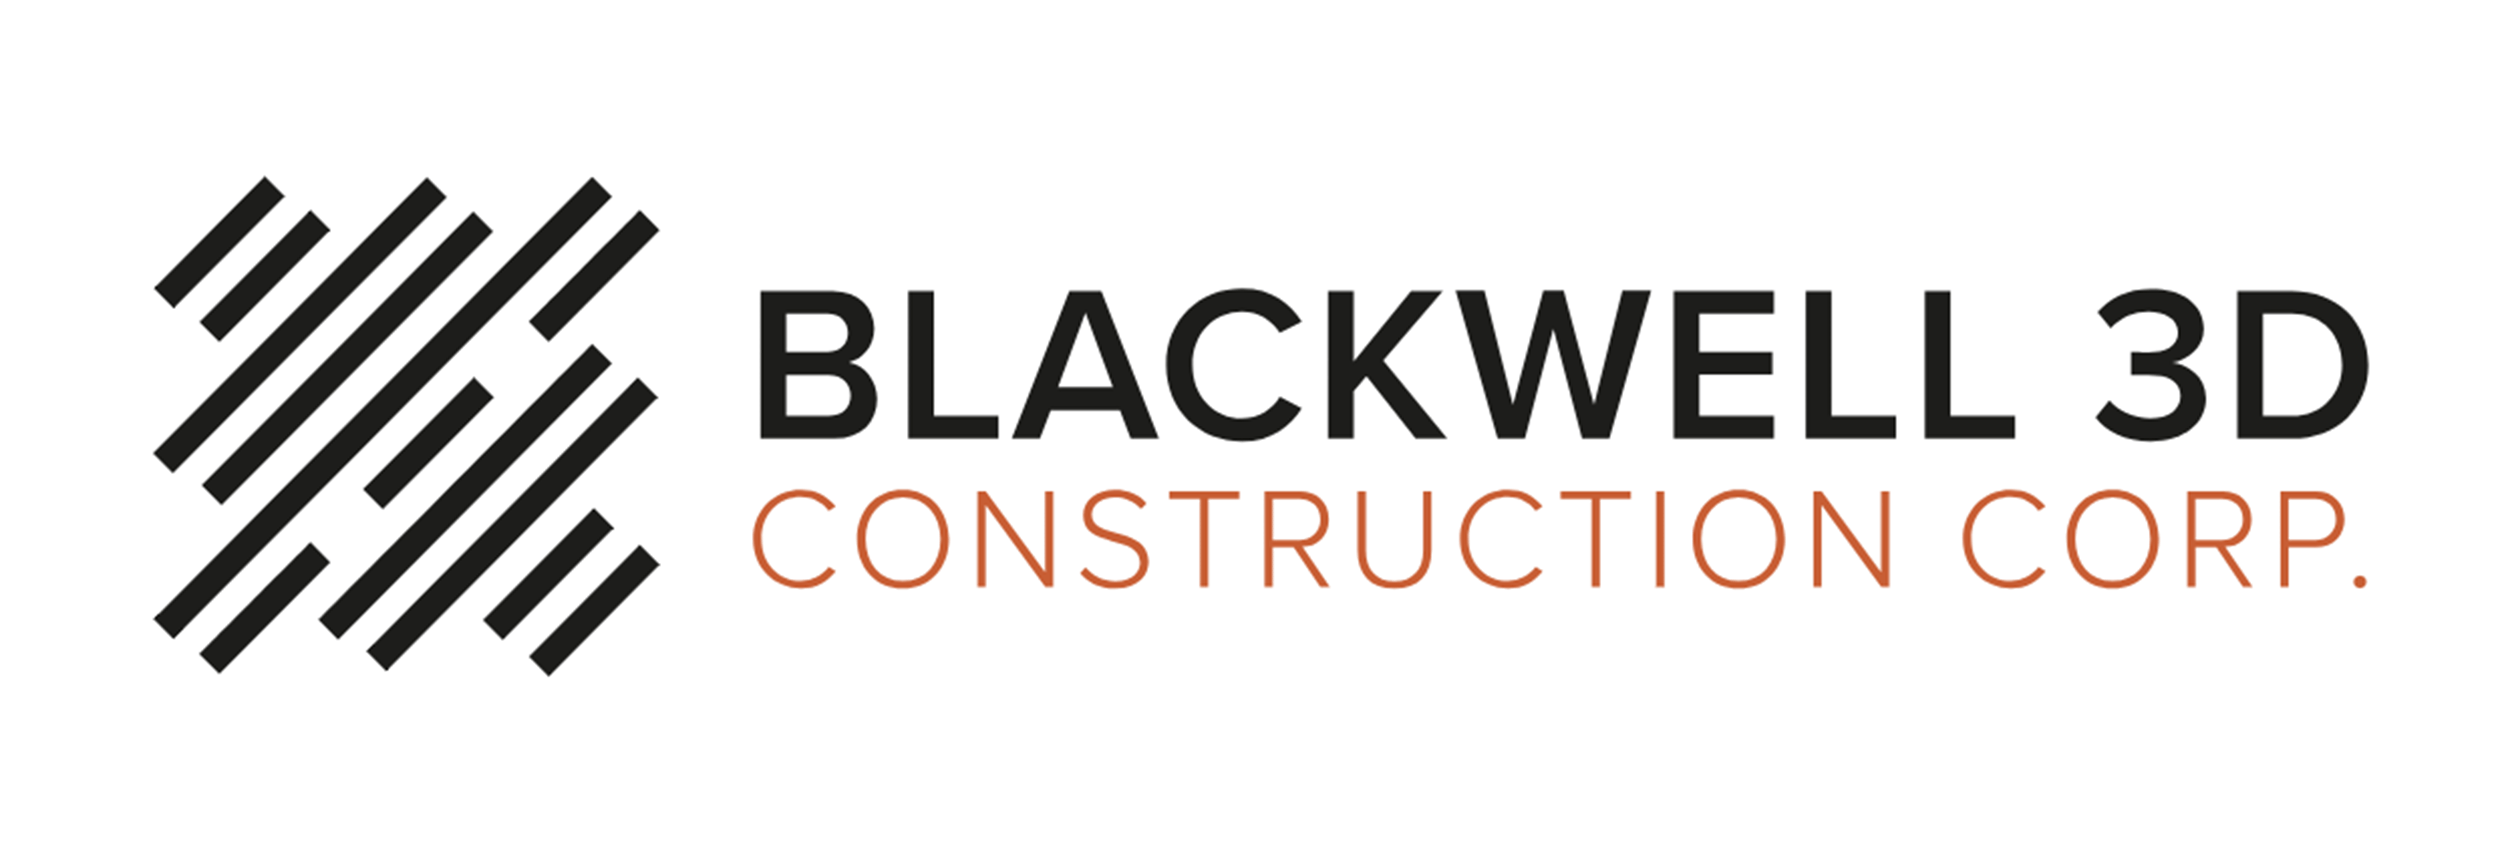 Blackwell 3D Construction Corp.